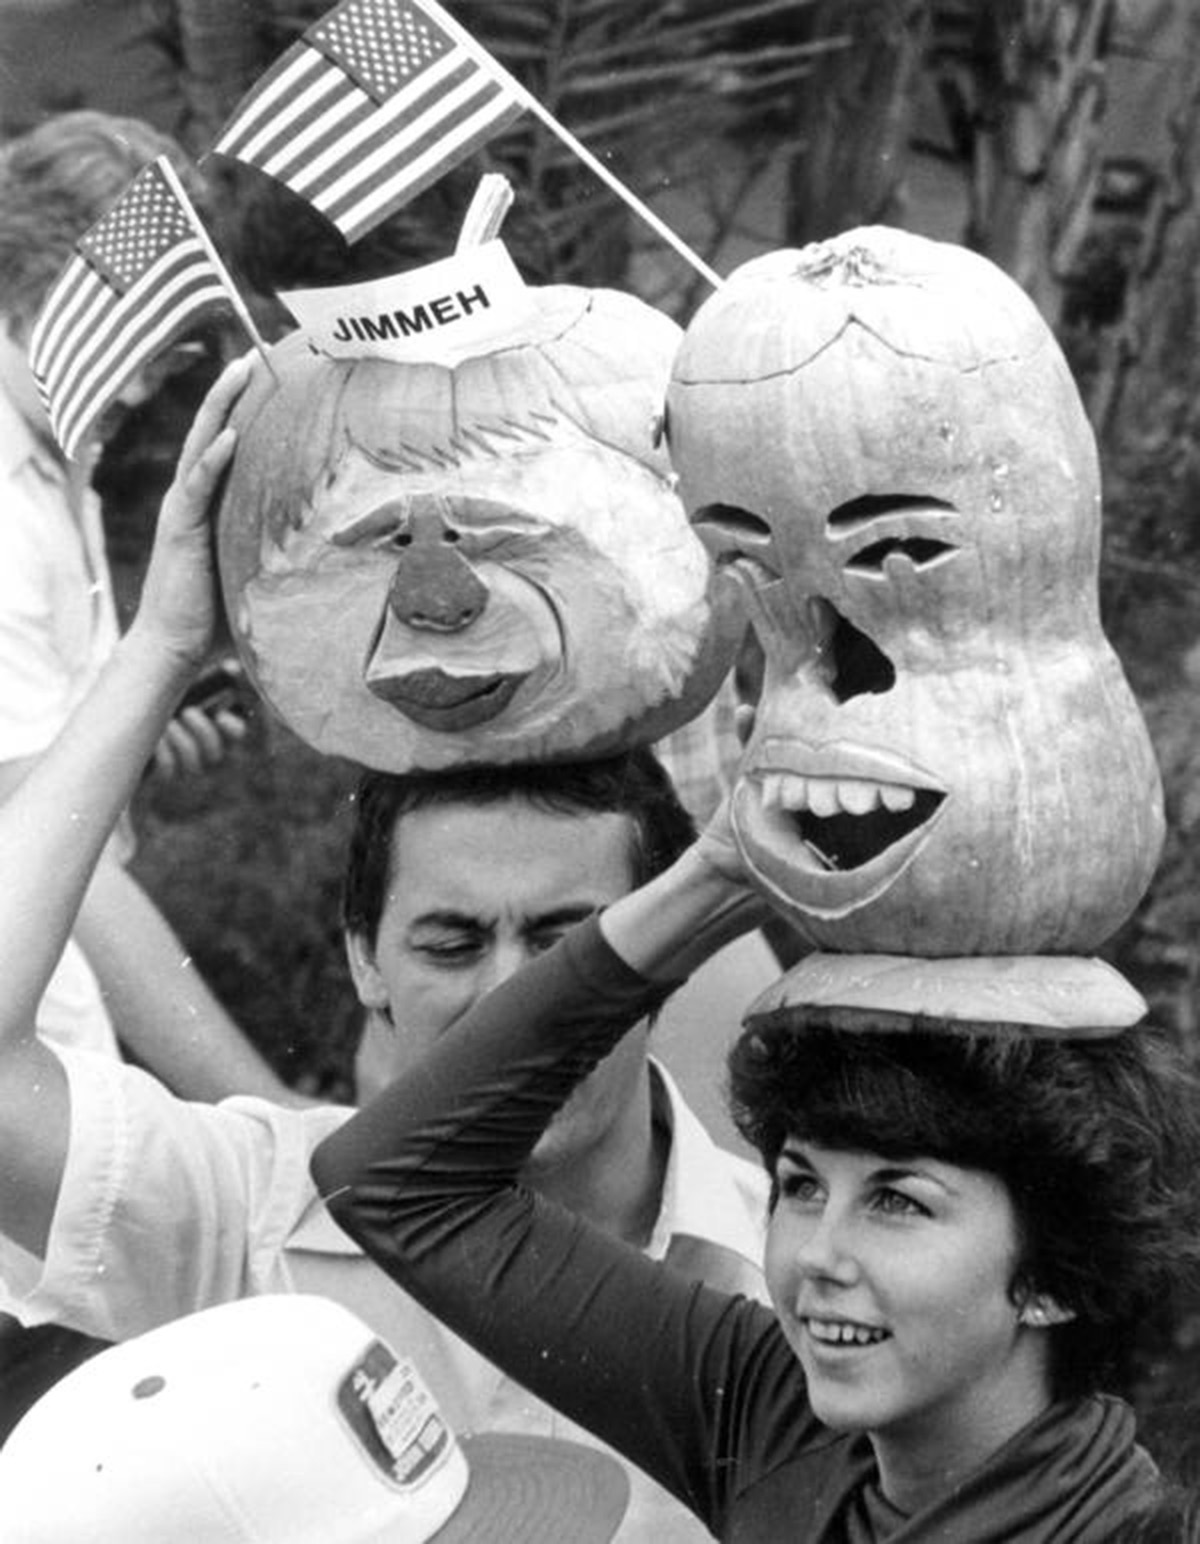 Photograph of Jimmy Carter-supporters with pumpkins carved in the likeness of Carter. 